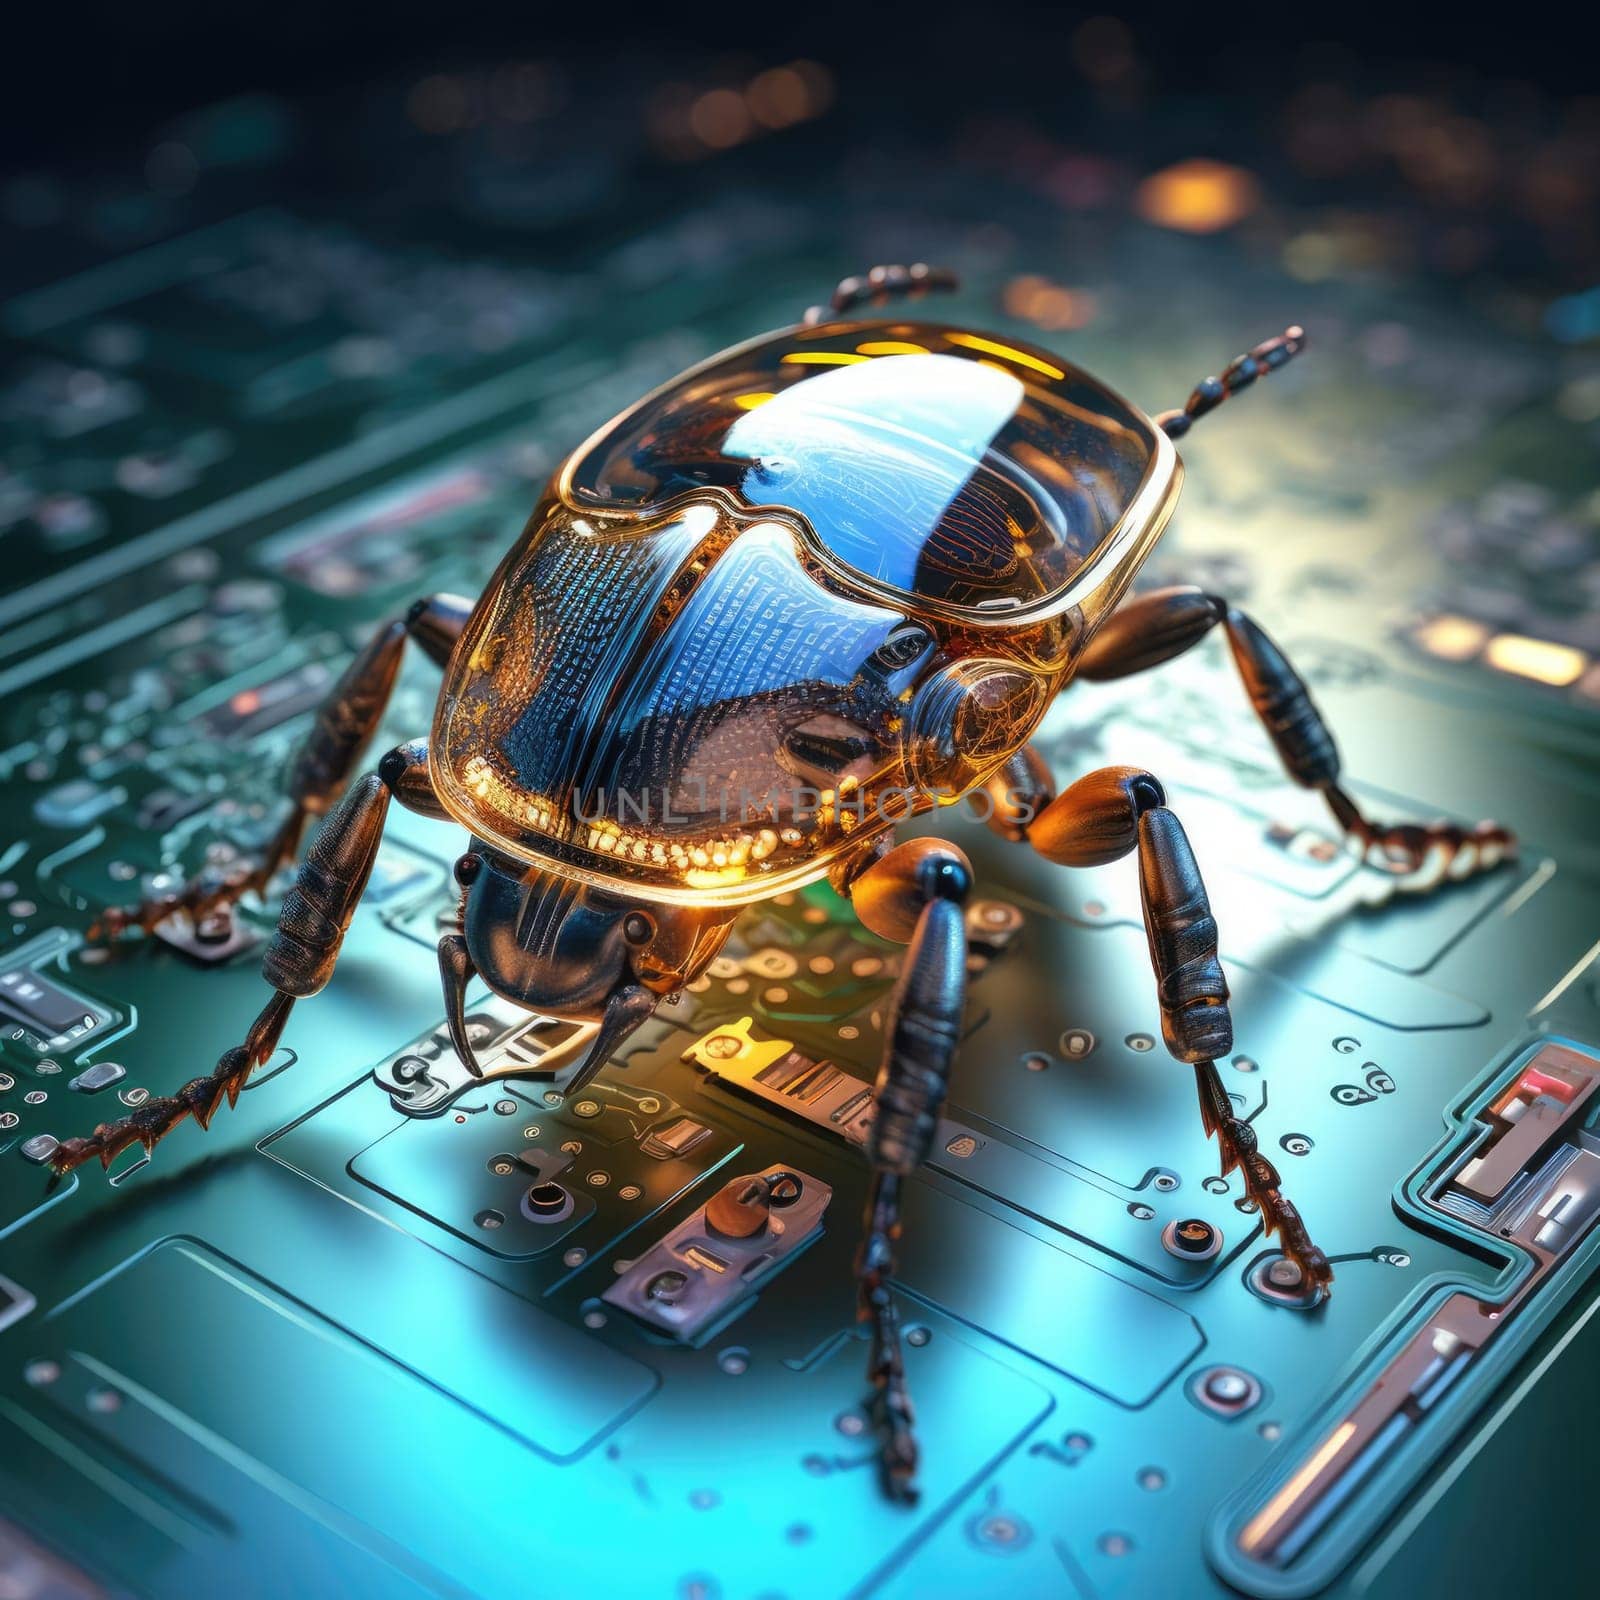 Electronic beetle on a chip. The concept of errors in software or errors in hardware